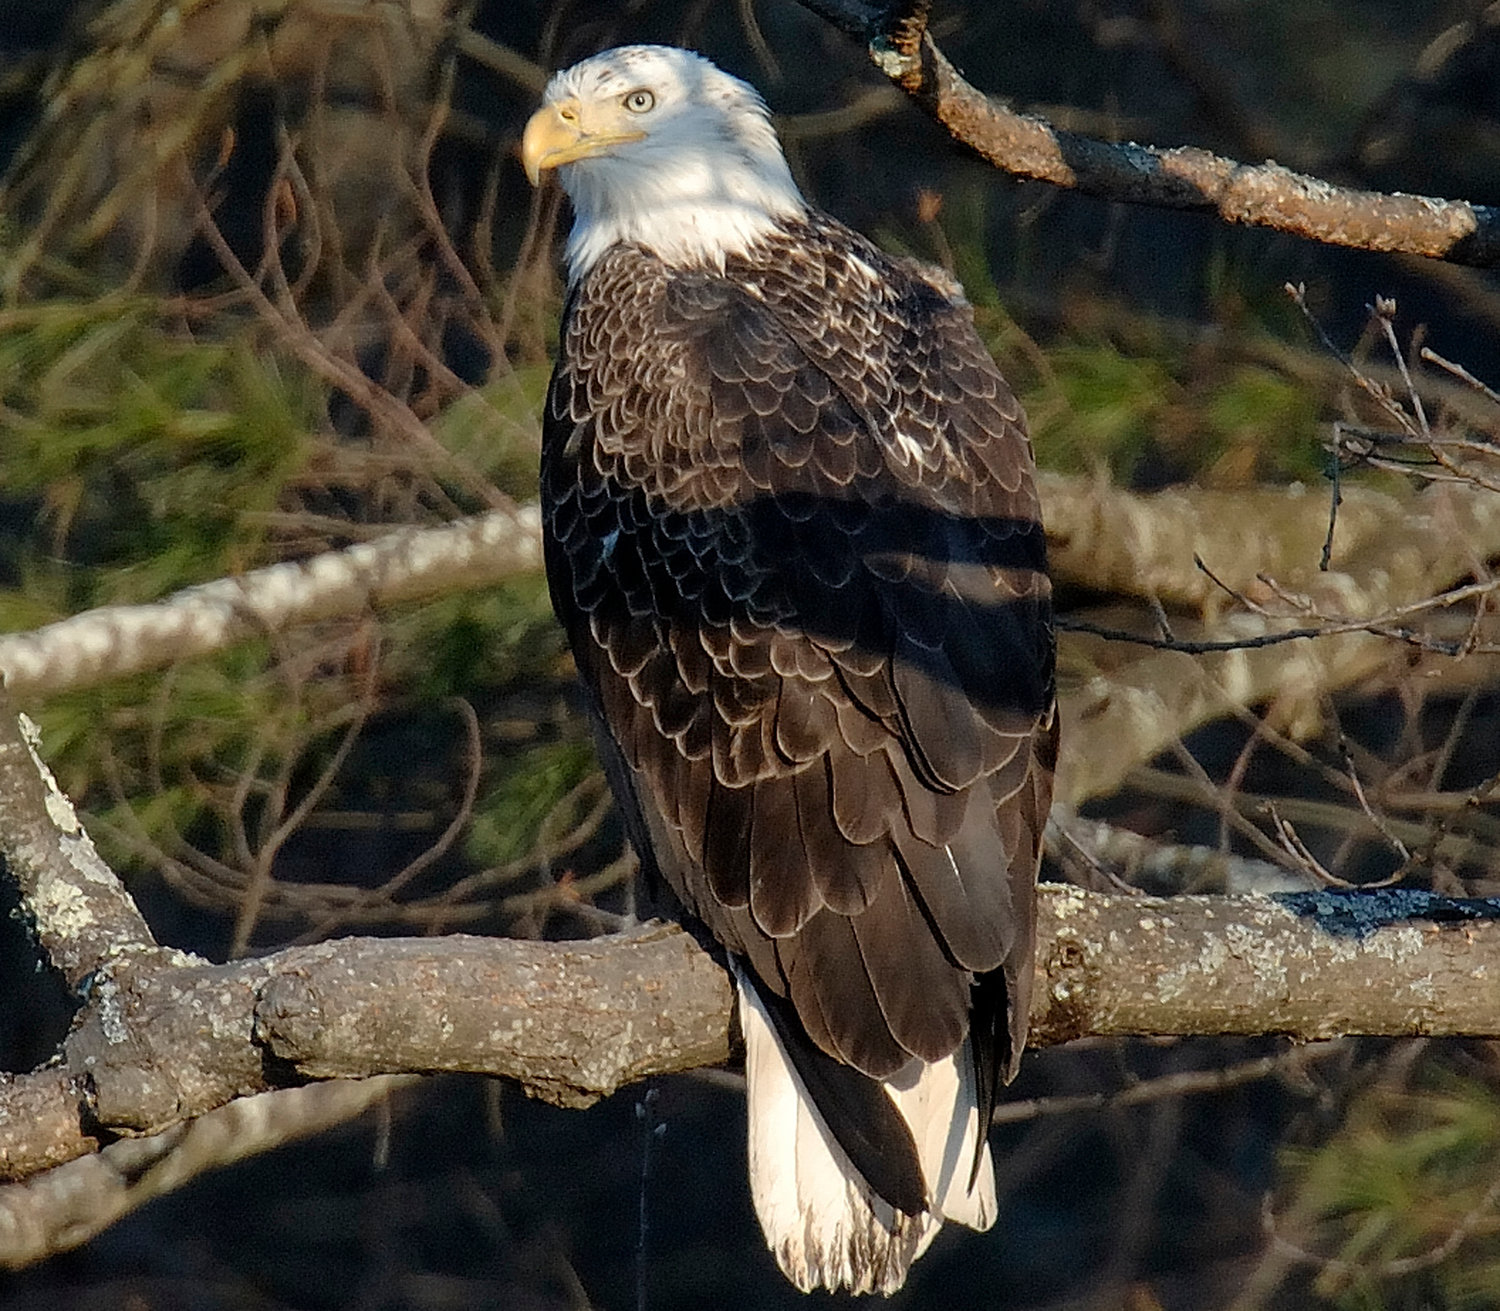 See more about the life of an eagle in the fall 2020 edition of Explore the Great Outdoors.